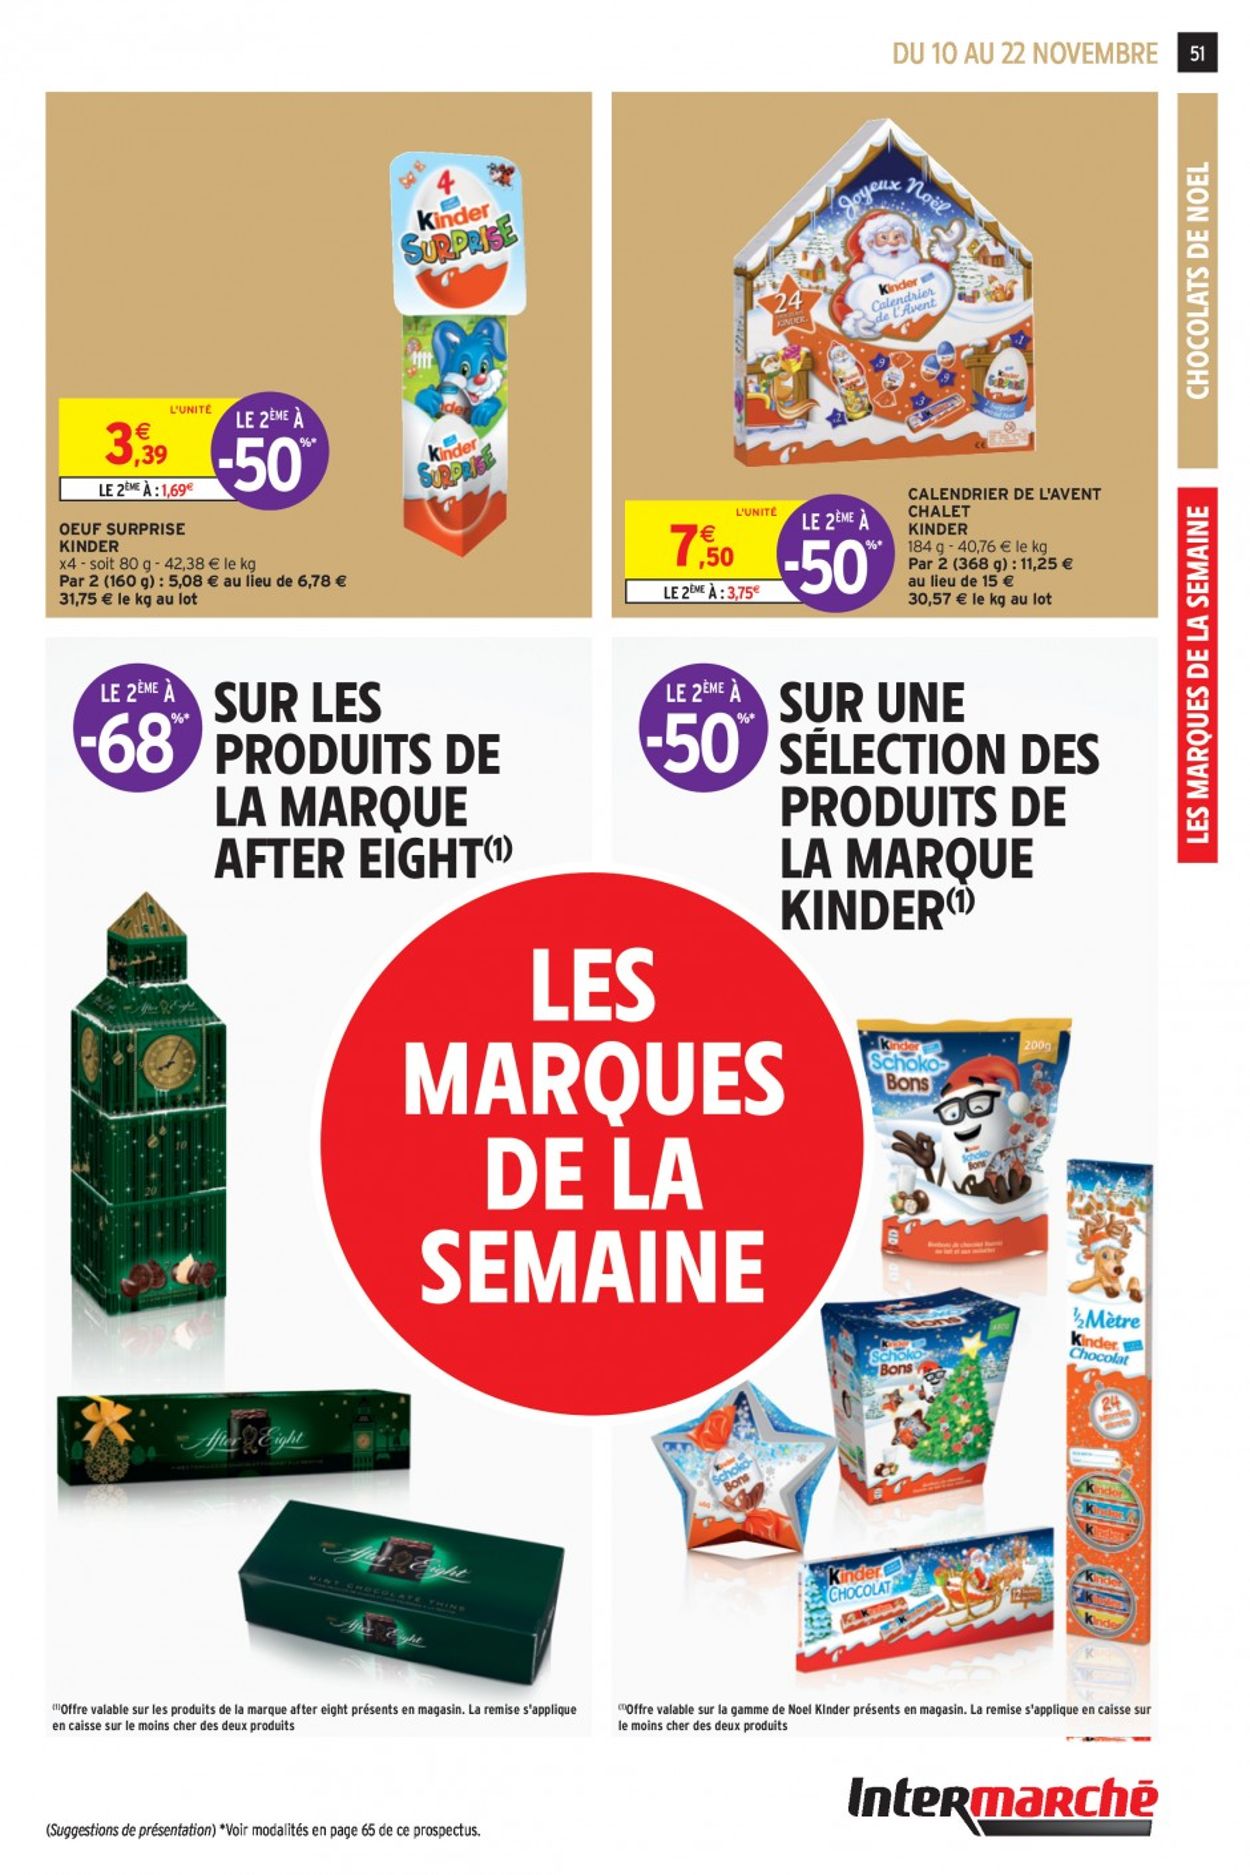 Intermarché Black Friday 2020 Catalogue - 10.11-22.11.2020 (Page 51)